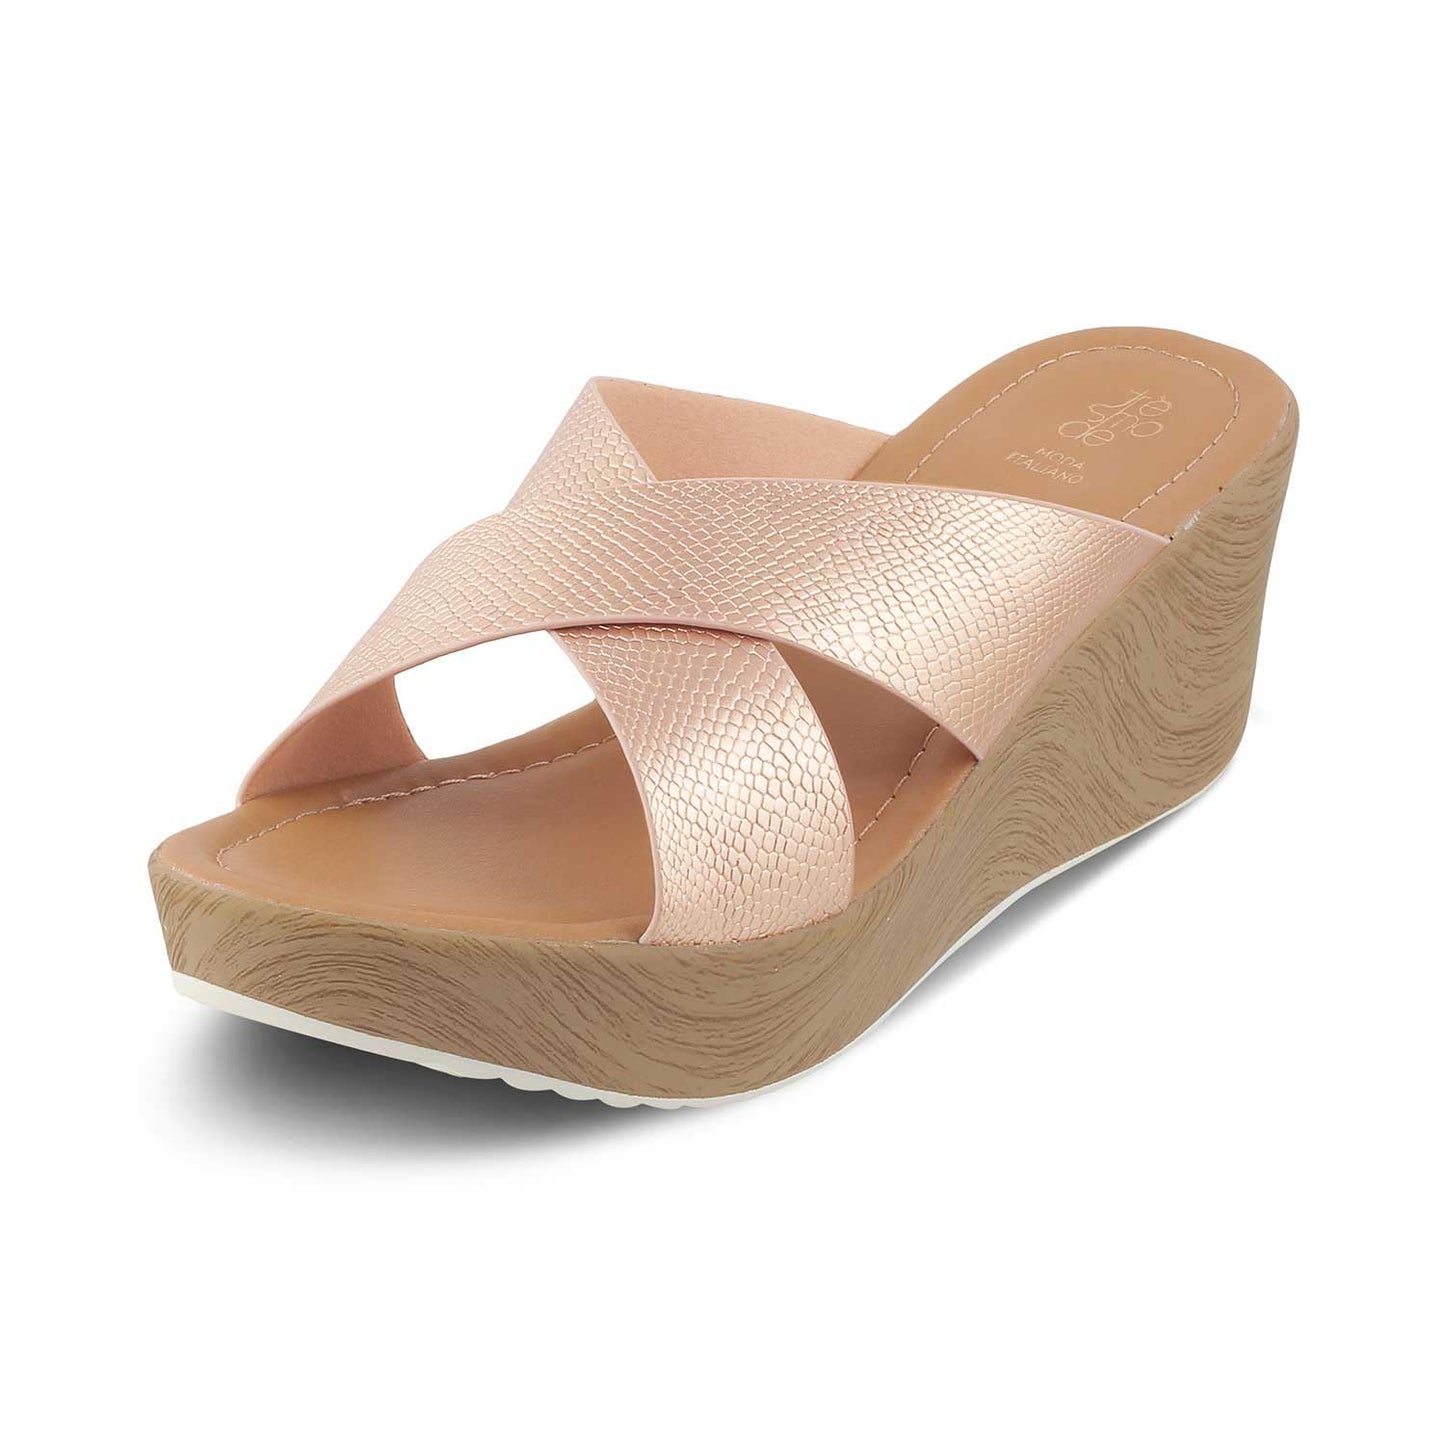 tresmode Santamon Champagne Women's Dress Wedge Sandals - Glam up Your Party Look! || Size (EU-36/UK-3/US-5)